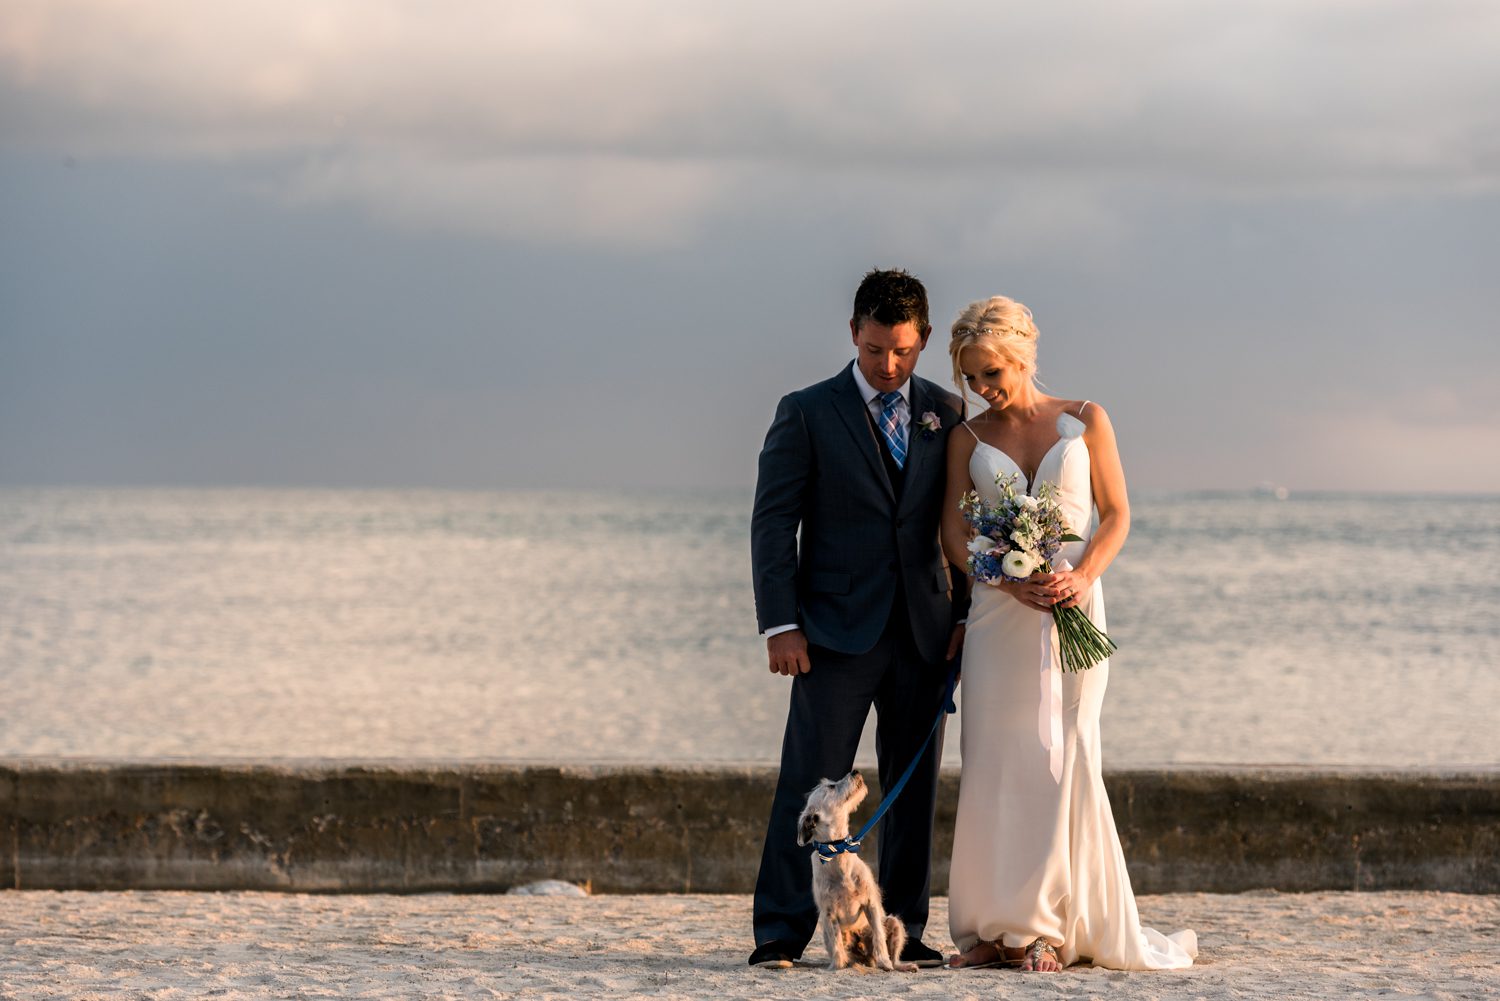 A beautiful bride and groom exchange vows on the sandy beaches of Key West Garden Club, accompanied by their beloved dog.